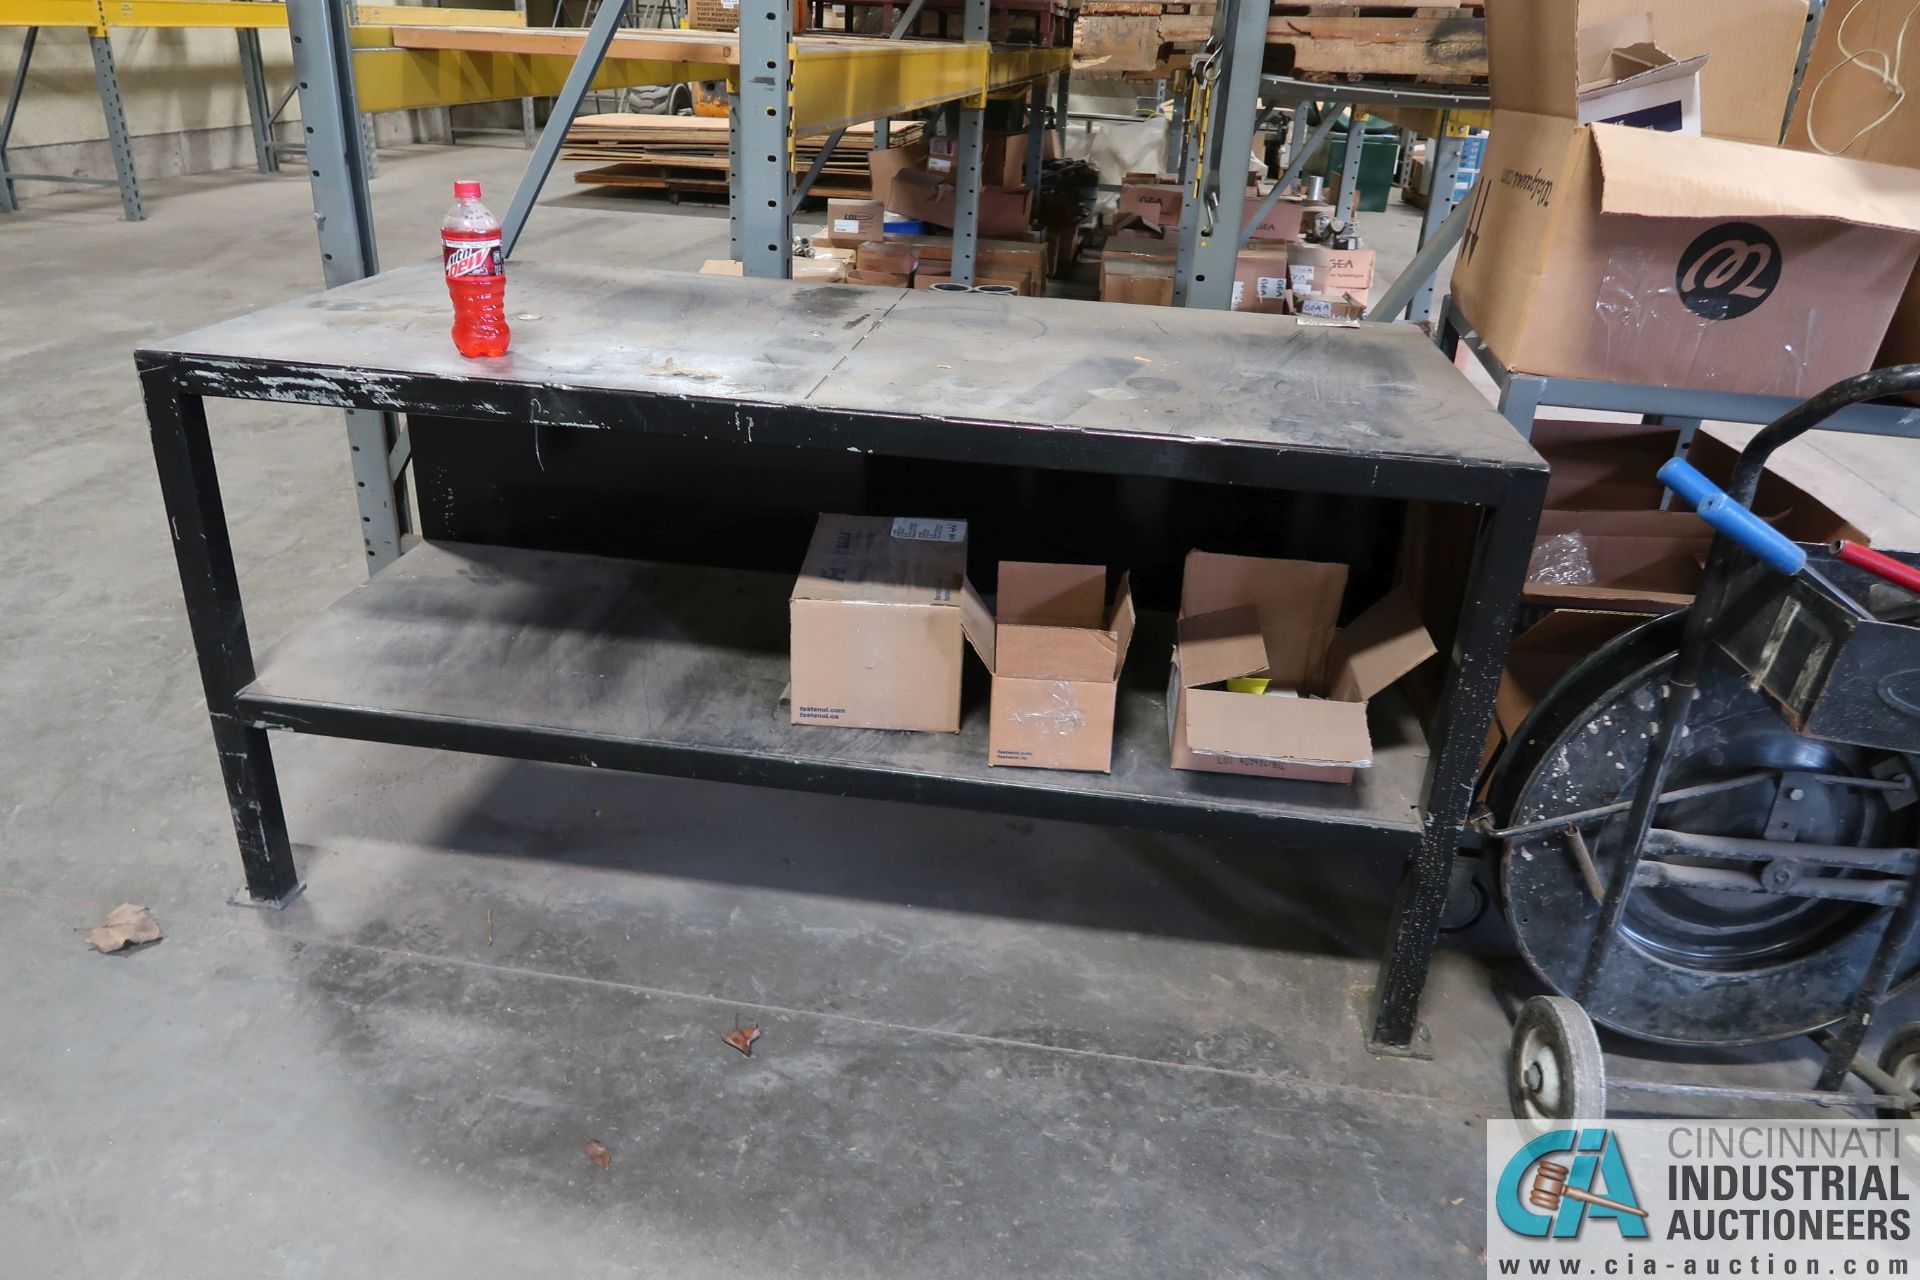 (LOT) STEEL BANDING CART, 2-WHEEL HARD TRUCK, SHIPPING TABLE, SHIPPING SUPPLIES - Image 4 of 4